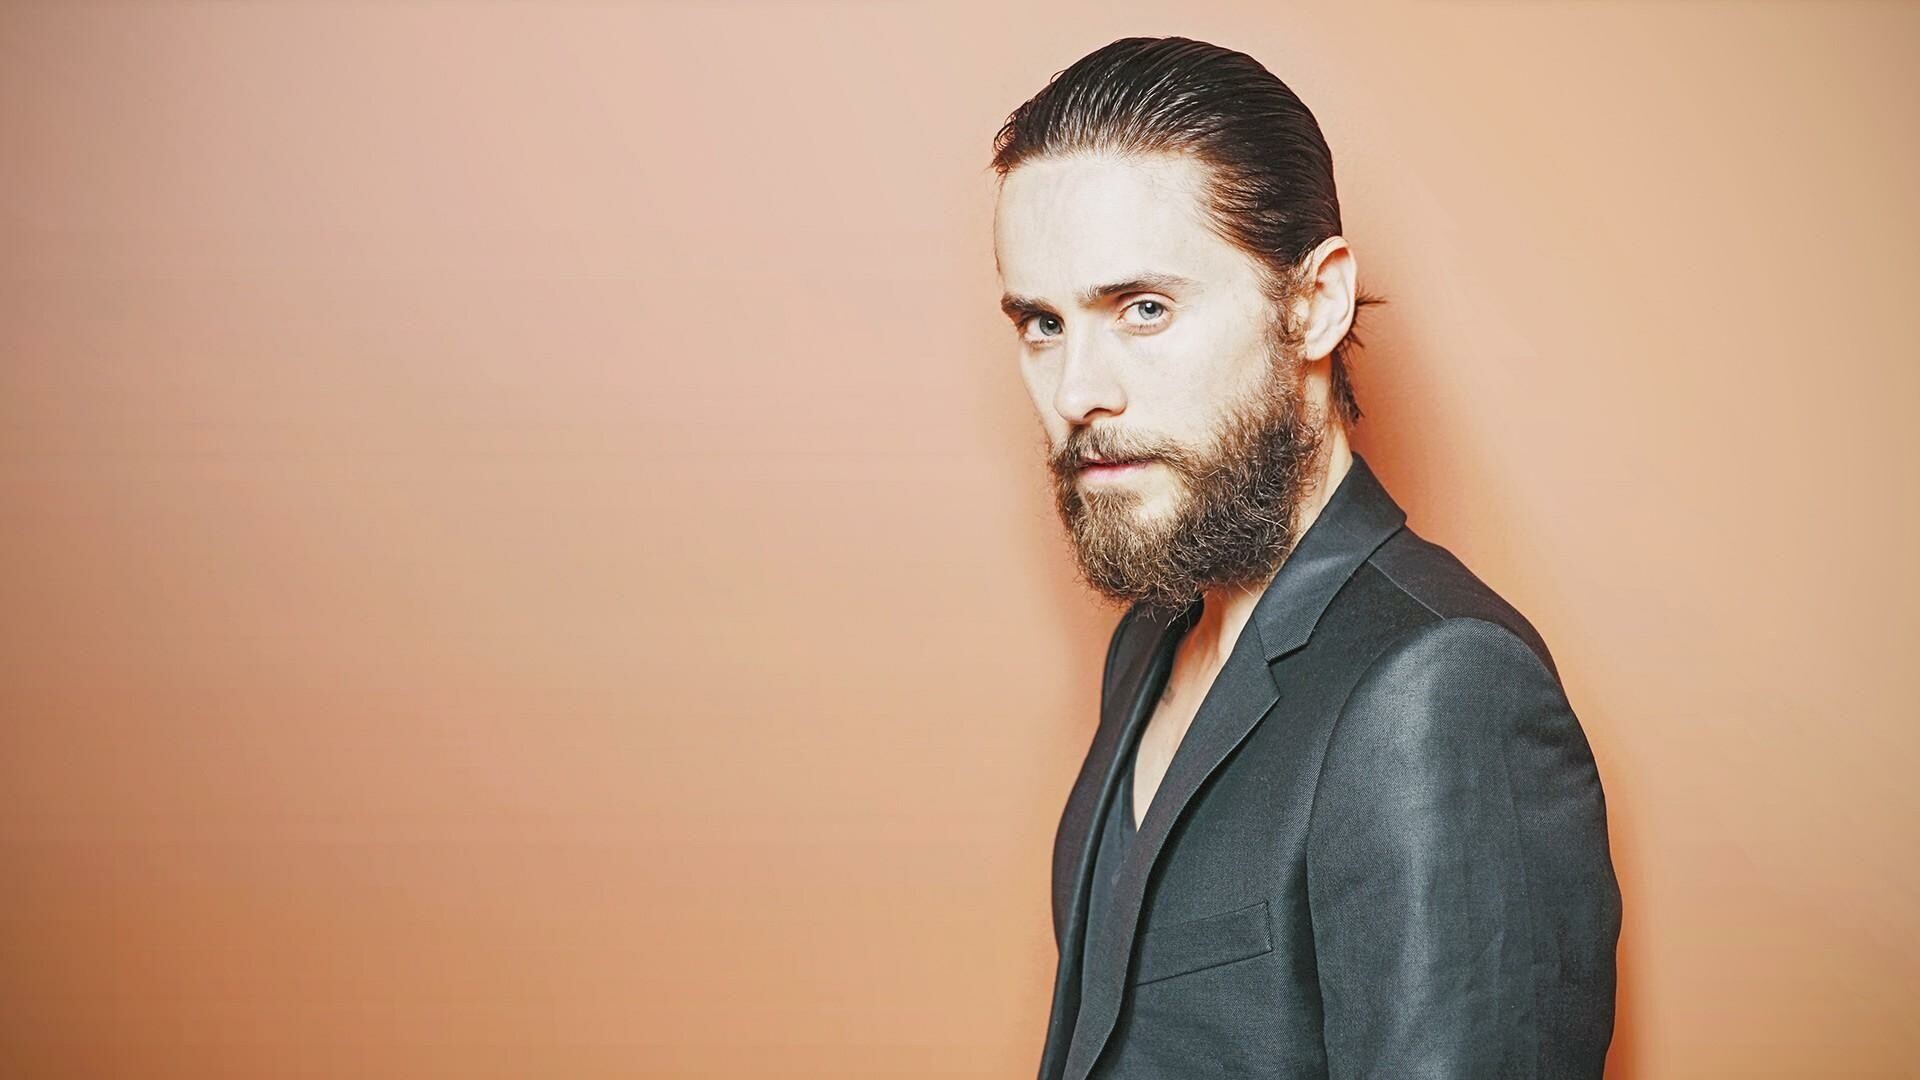 Jared Leto: 30 Seconds to Mars, One of the era's leading alternative rock bands. 1920x1080 Full HD Background.